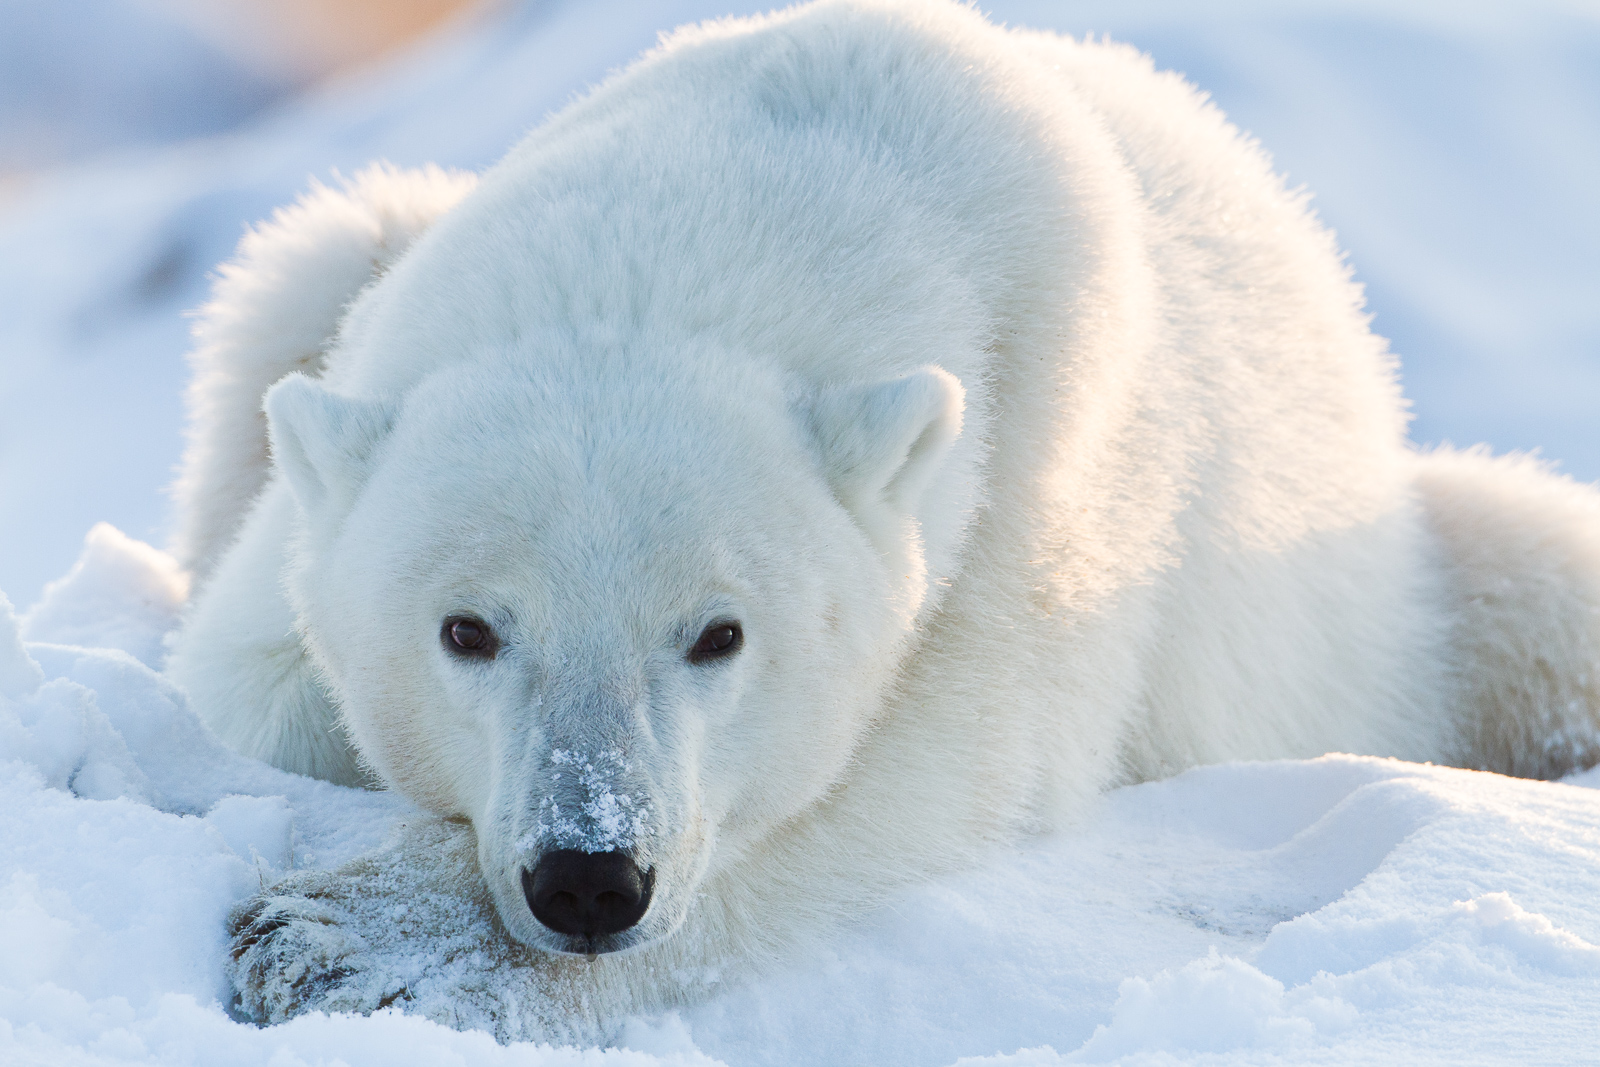 Up on the perch and playfully staring back this young polar bear enjoys the fresh snow of the new winter season.